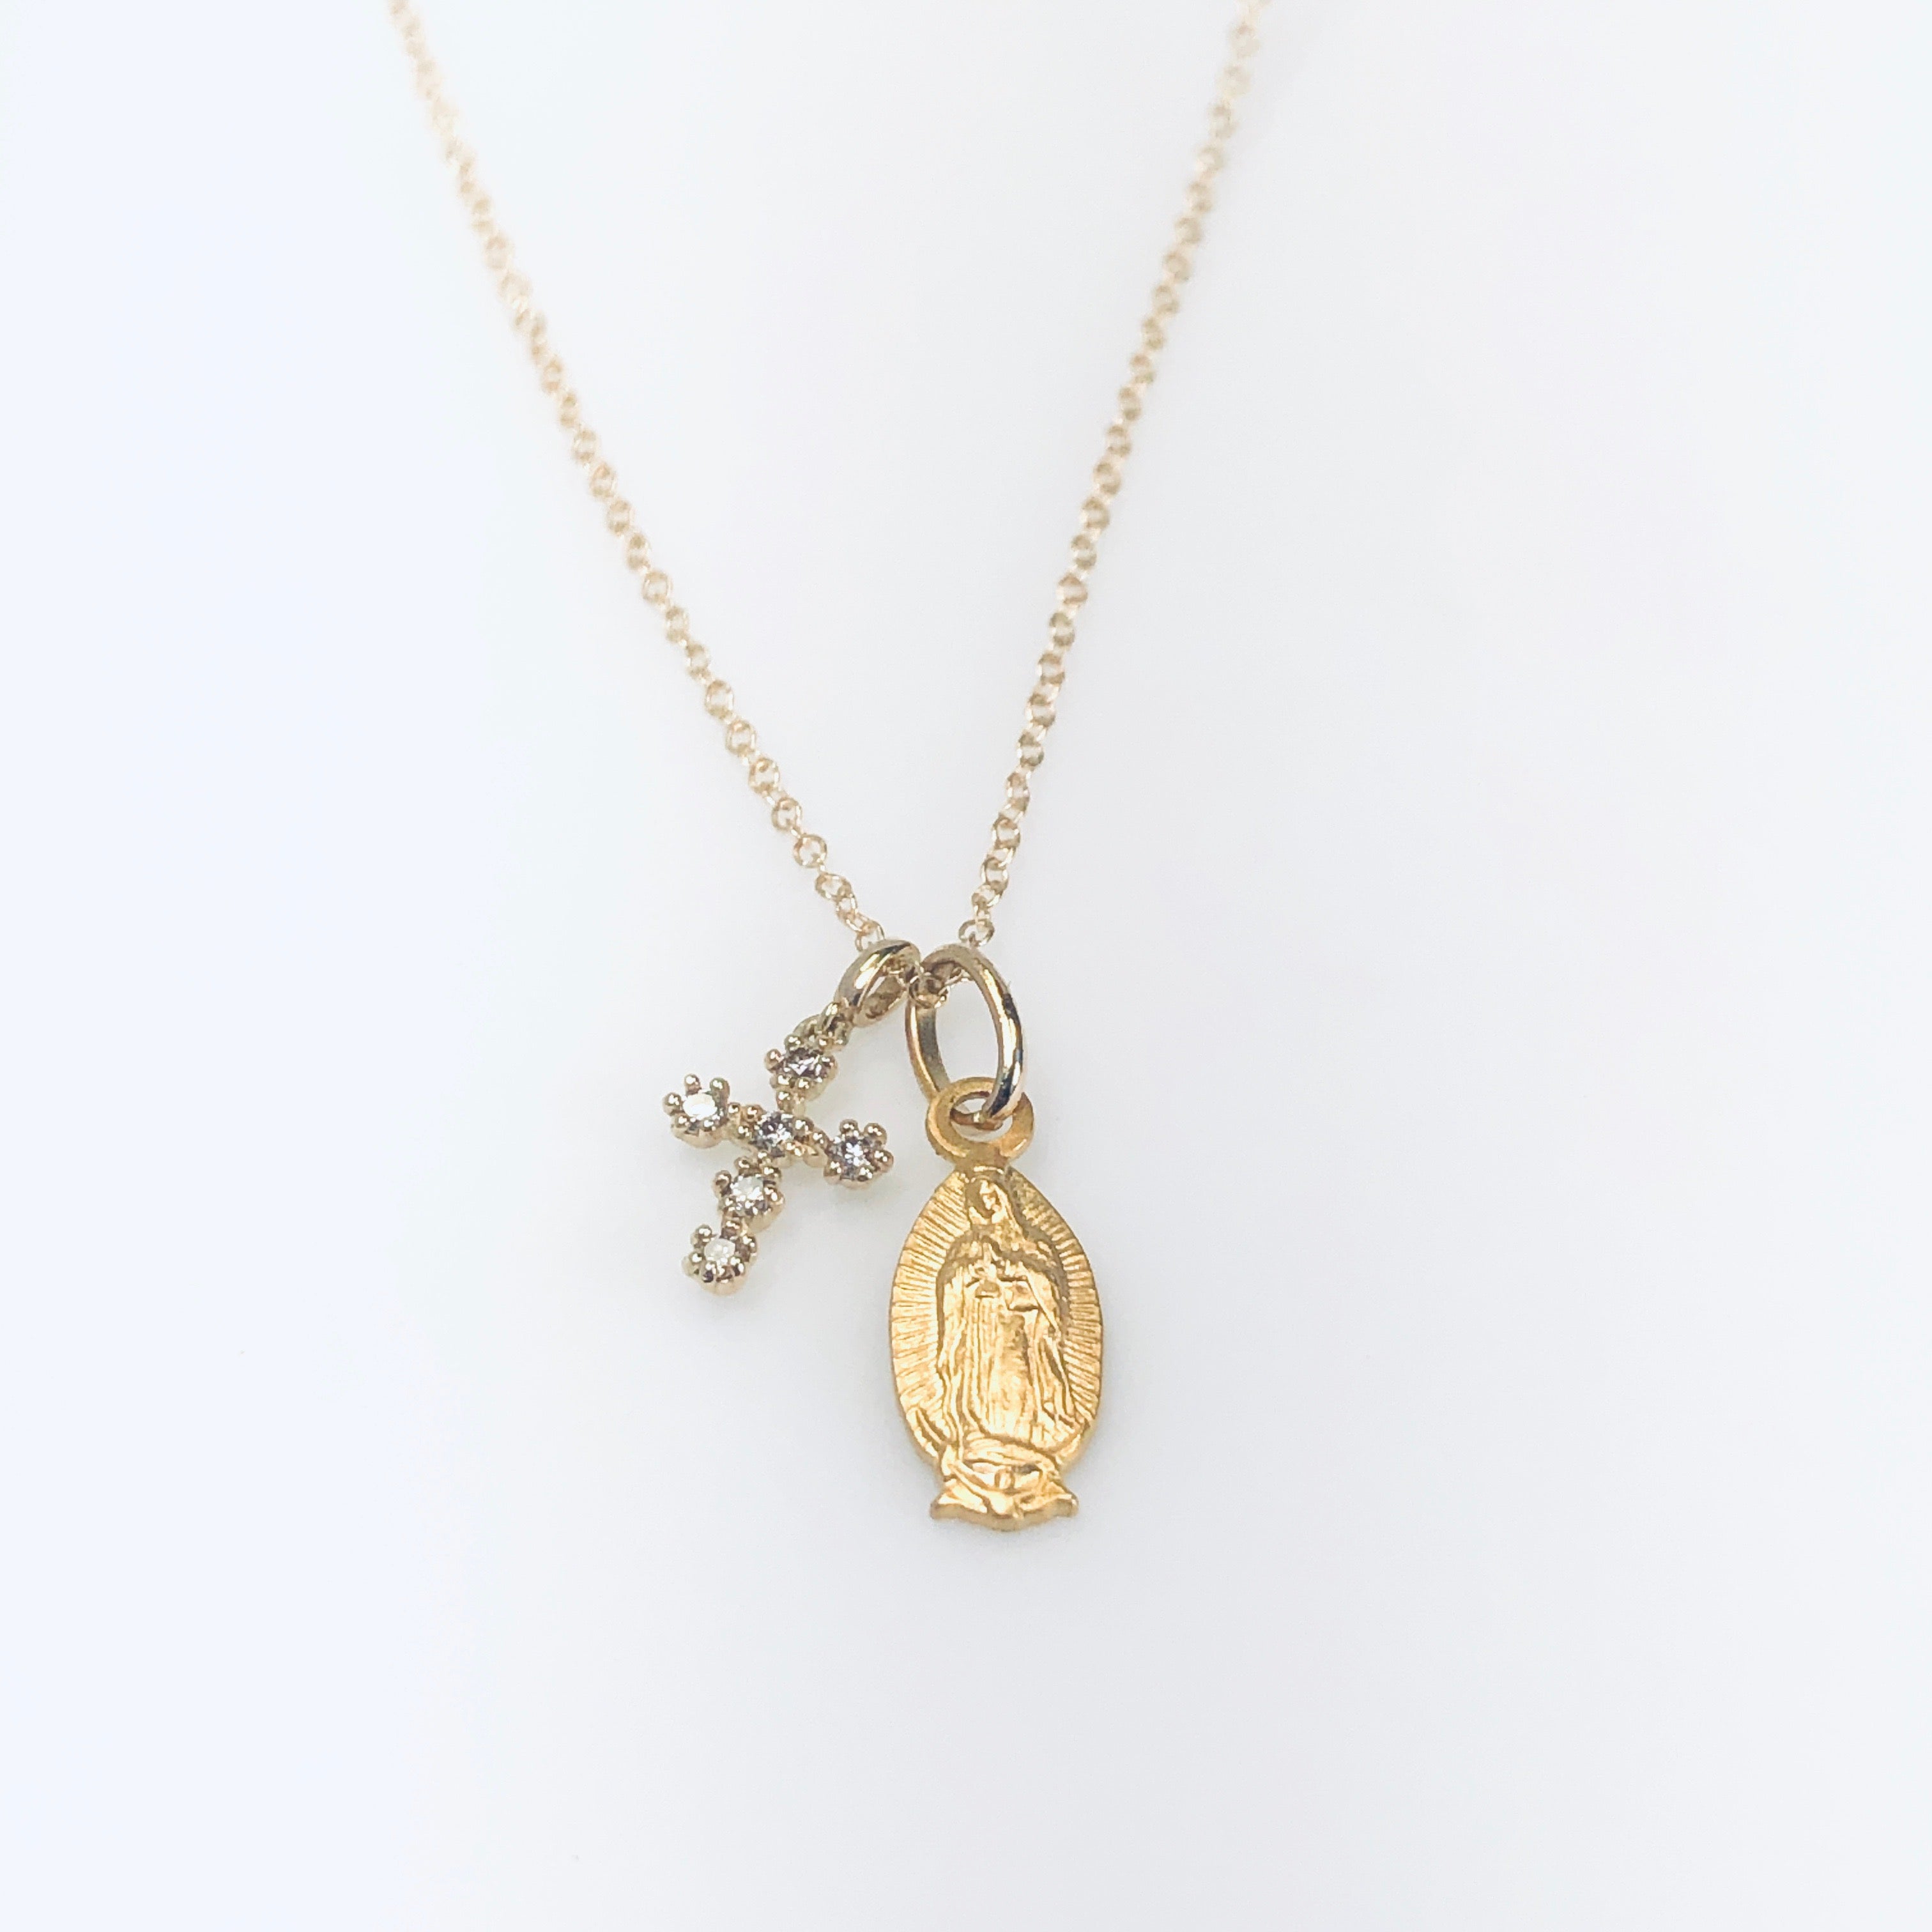 WD584 14KT Cross and Virgin Mary Metal Necklace